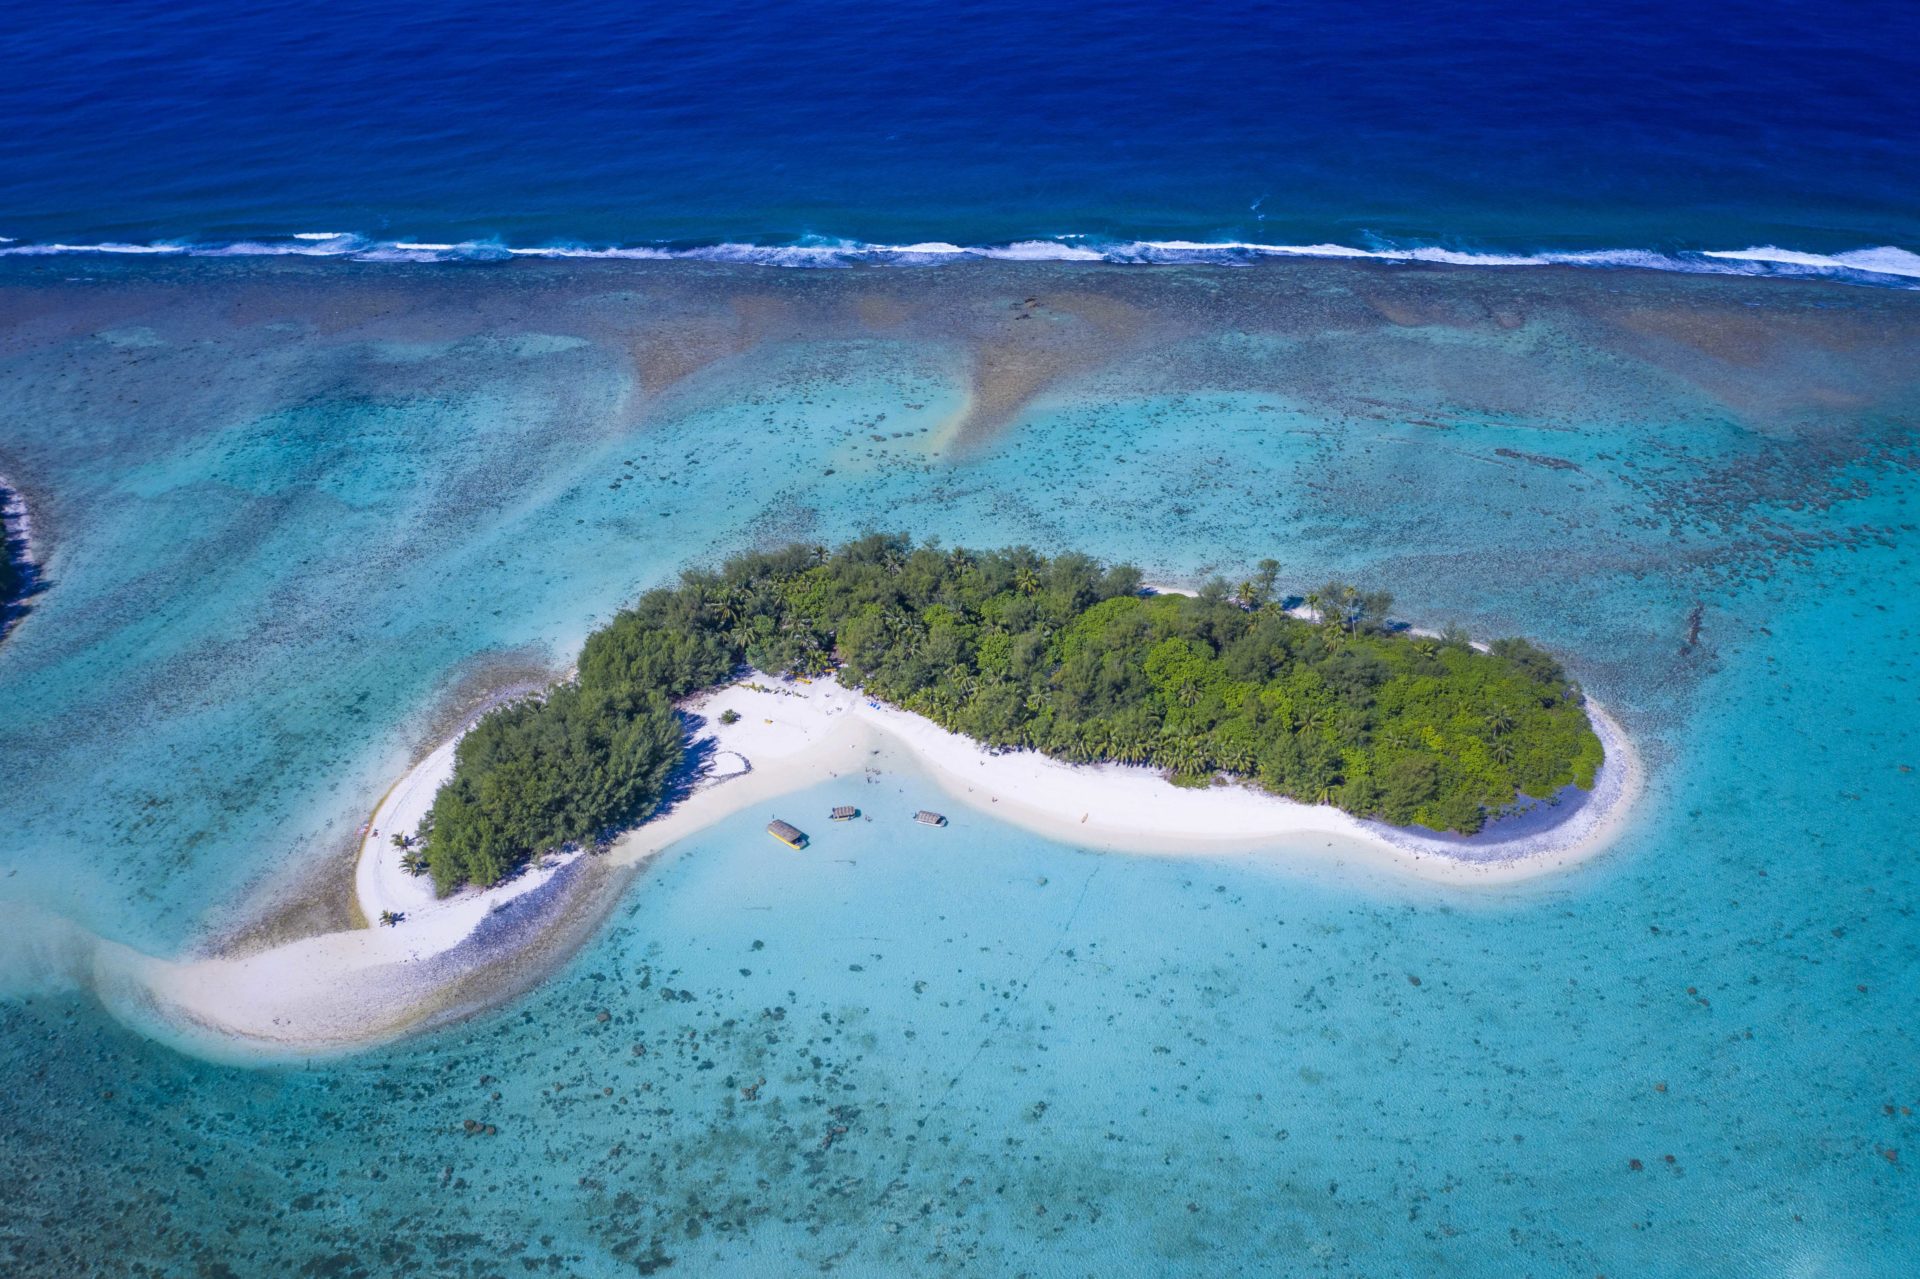 A spectacular aerial image of Motu Koromiri, a secluded private island set amidst the clear blue lagoon showcasing the splashing of waves towards the outer reef